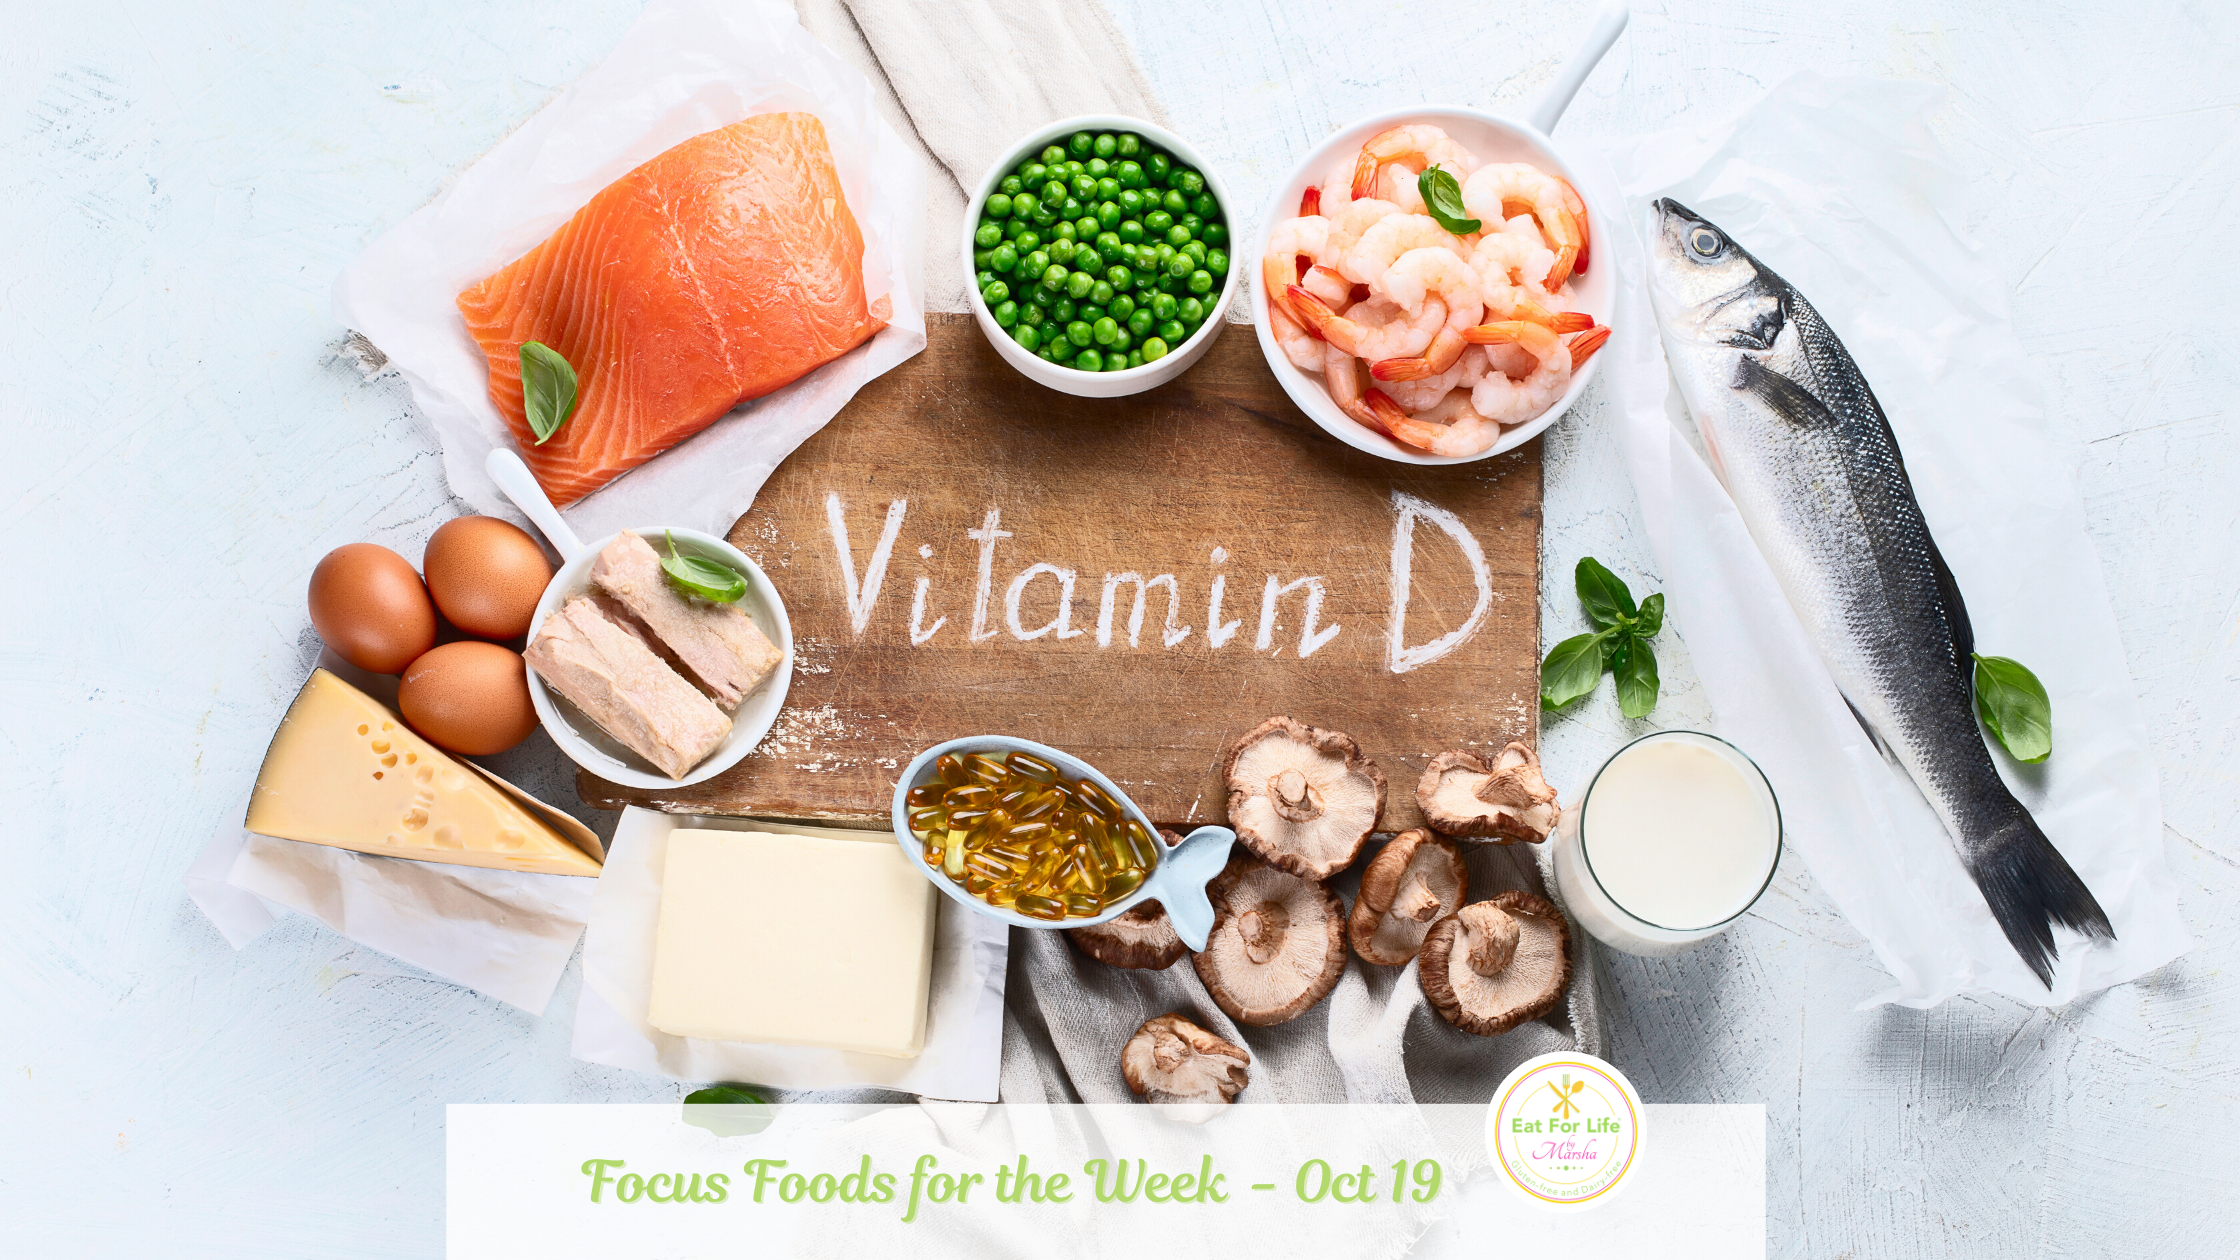 Vitamin D - Focus Foods for the week of October 19